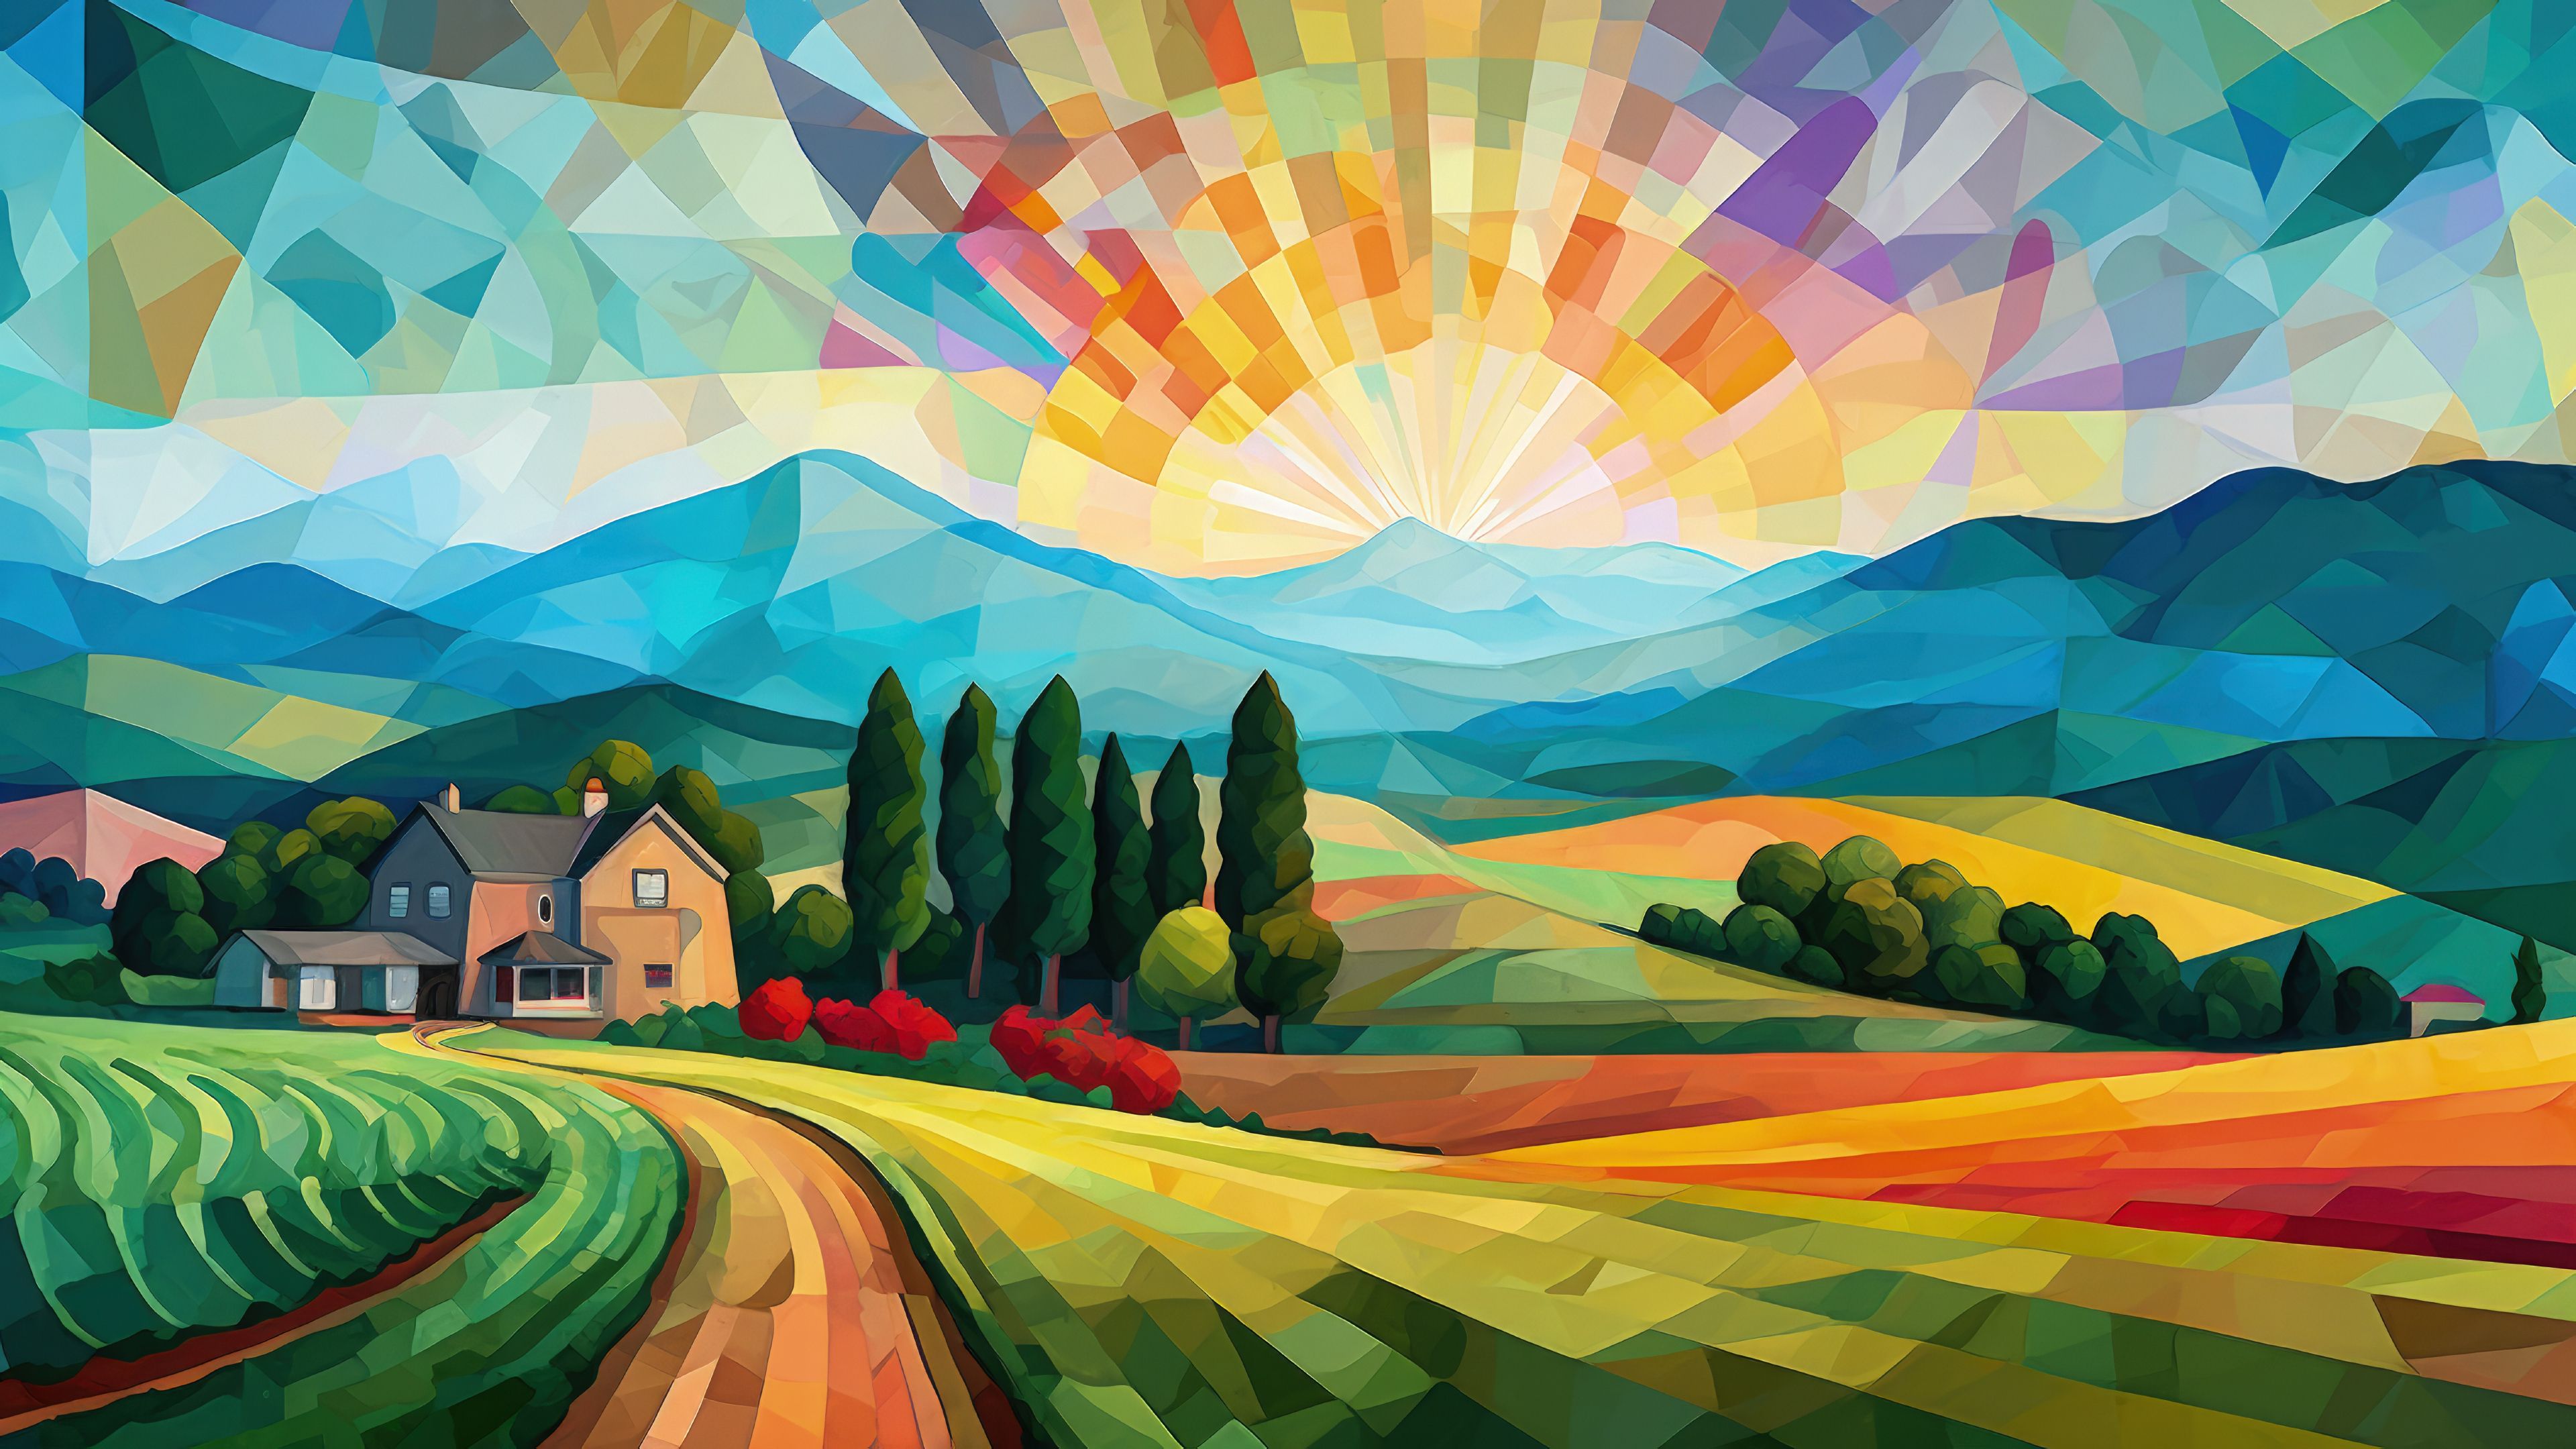 Colorful Cubist Countryside Hills - Wallpaper Cave